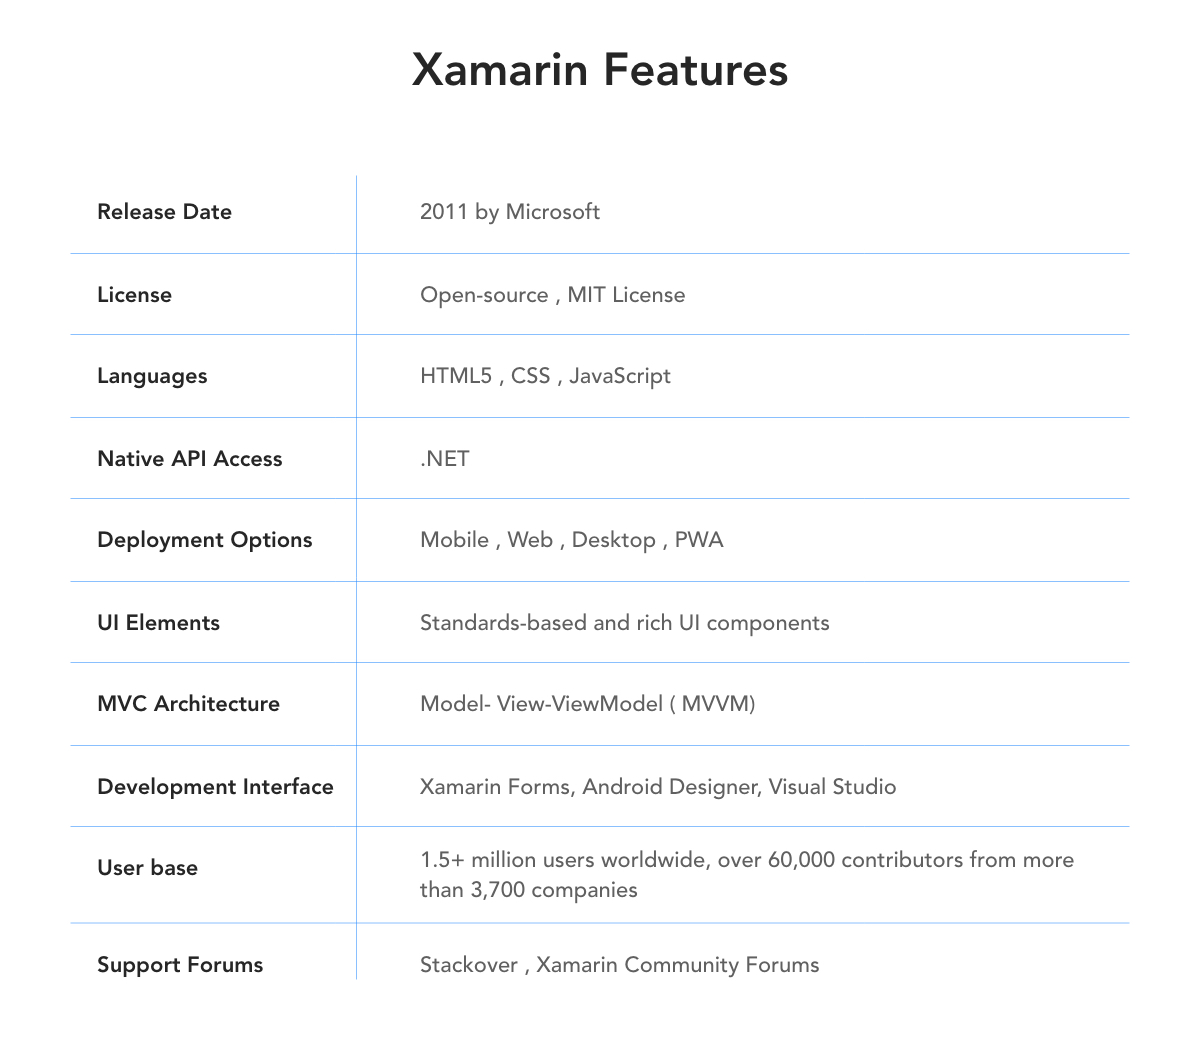 Xamarin Android Features

